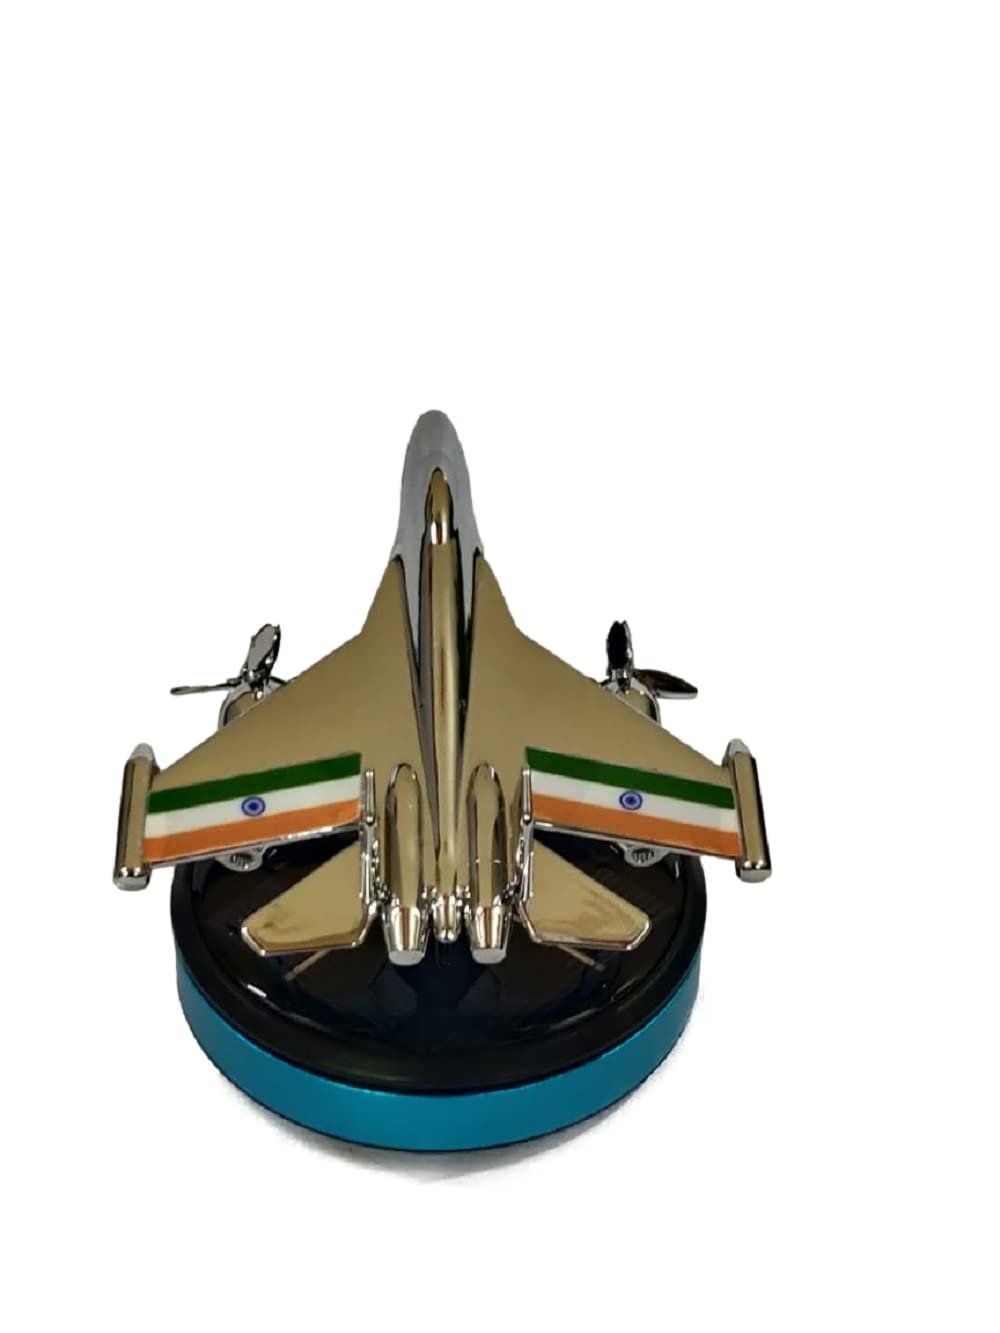 Car Aroma Diffuser Air Freshener Perfume Solar Power Dashboard Jet style Decoration Perfume With Indian Flag Design (Blue) Image 